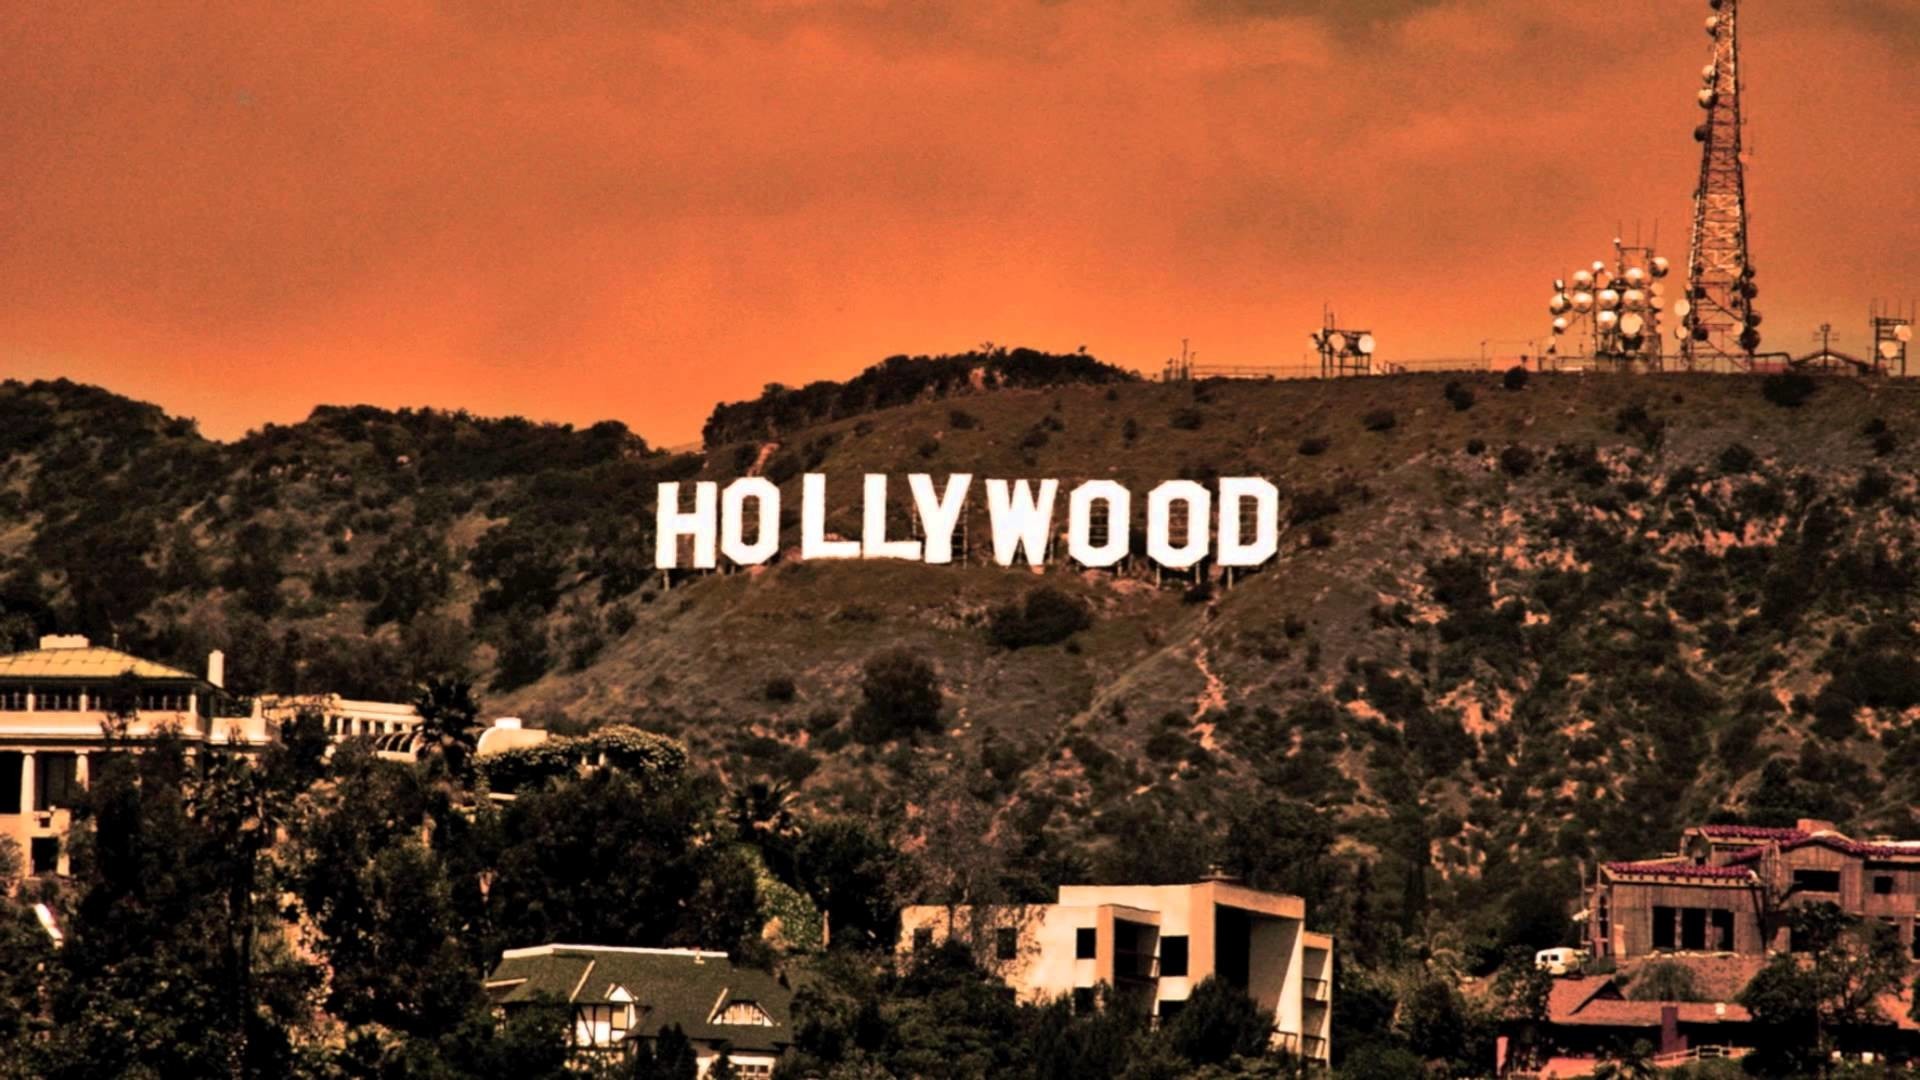 High Definition Wallpaper Of The Hollywood Signboard In Los